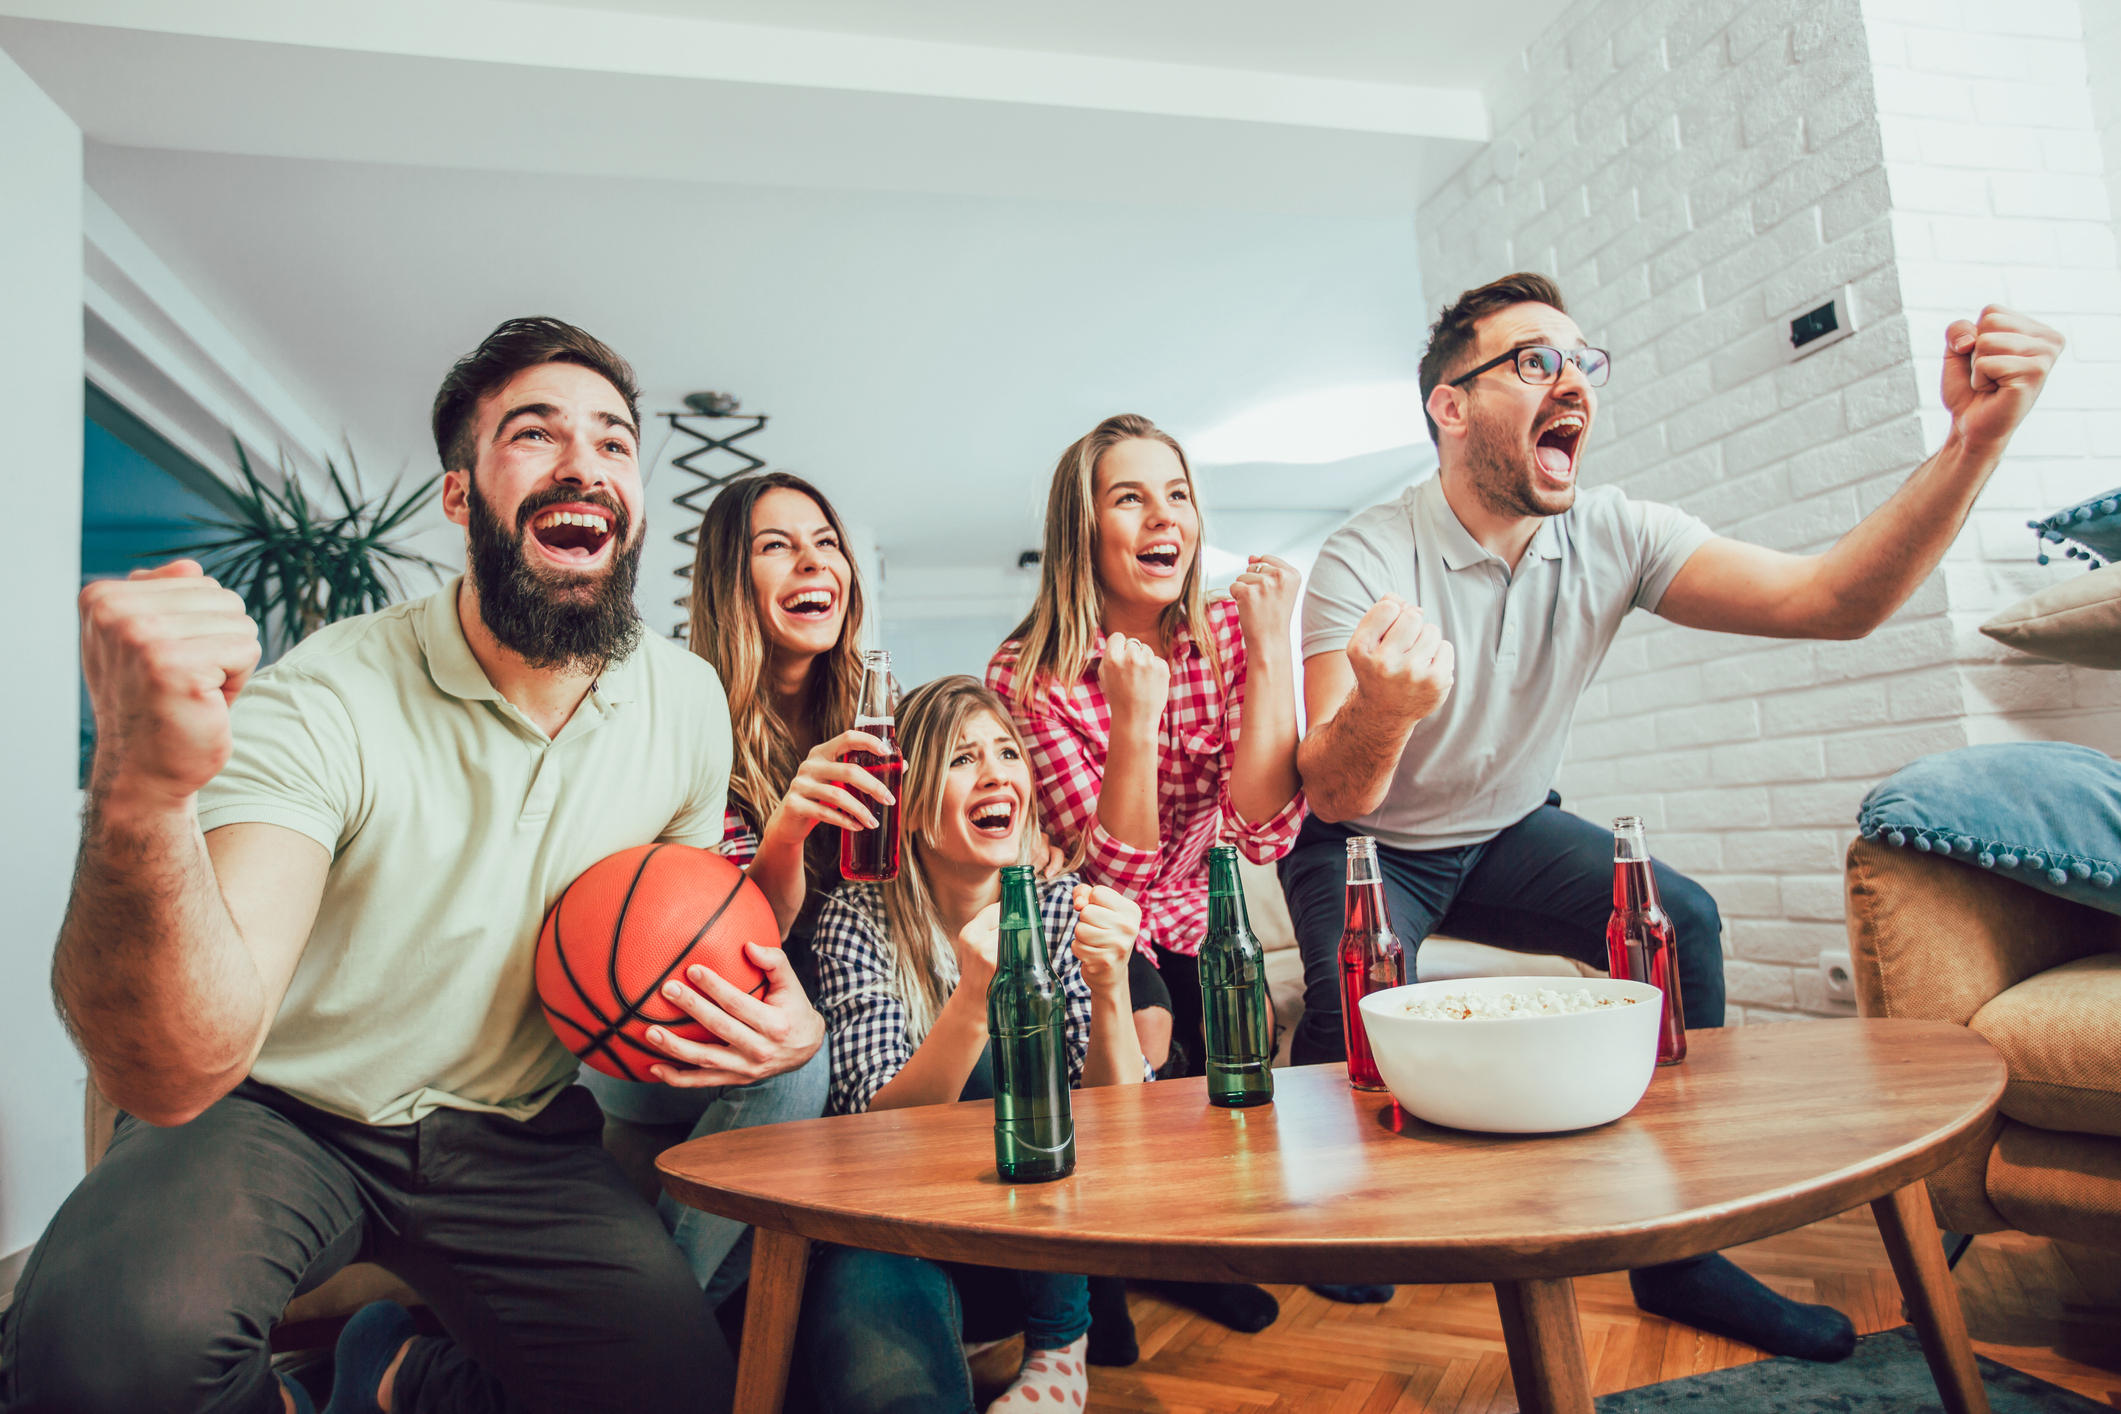 Happy friends or basketball fans watching basketball game on tv and celebrating victory at home.Friendship, sports and entertainment concept.